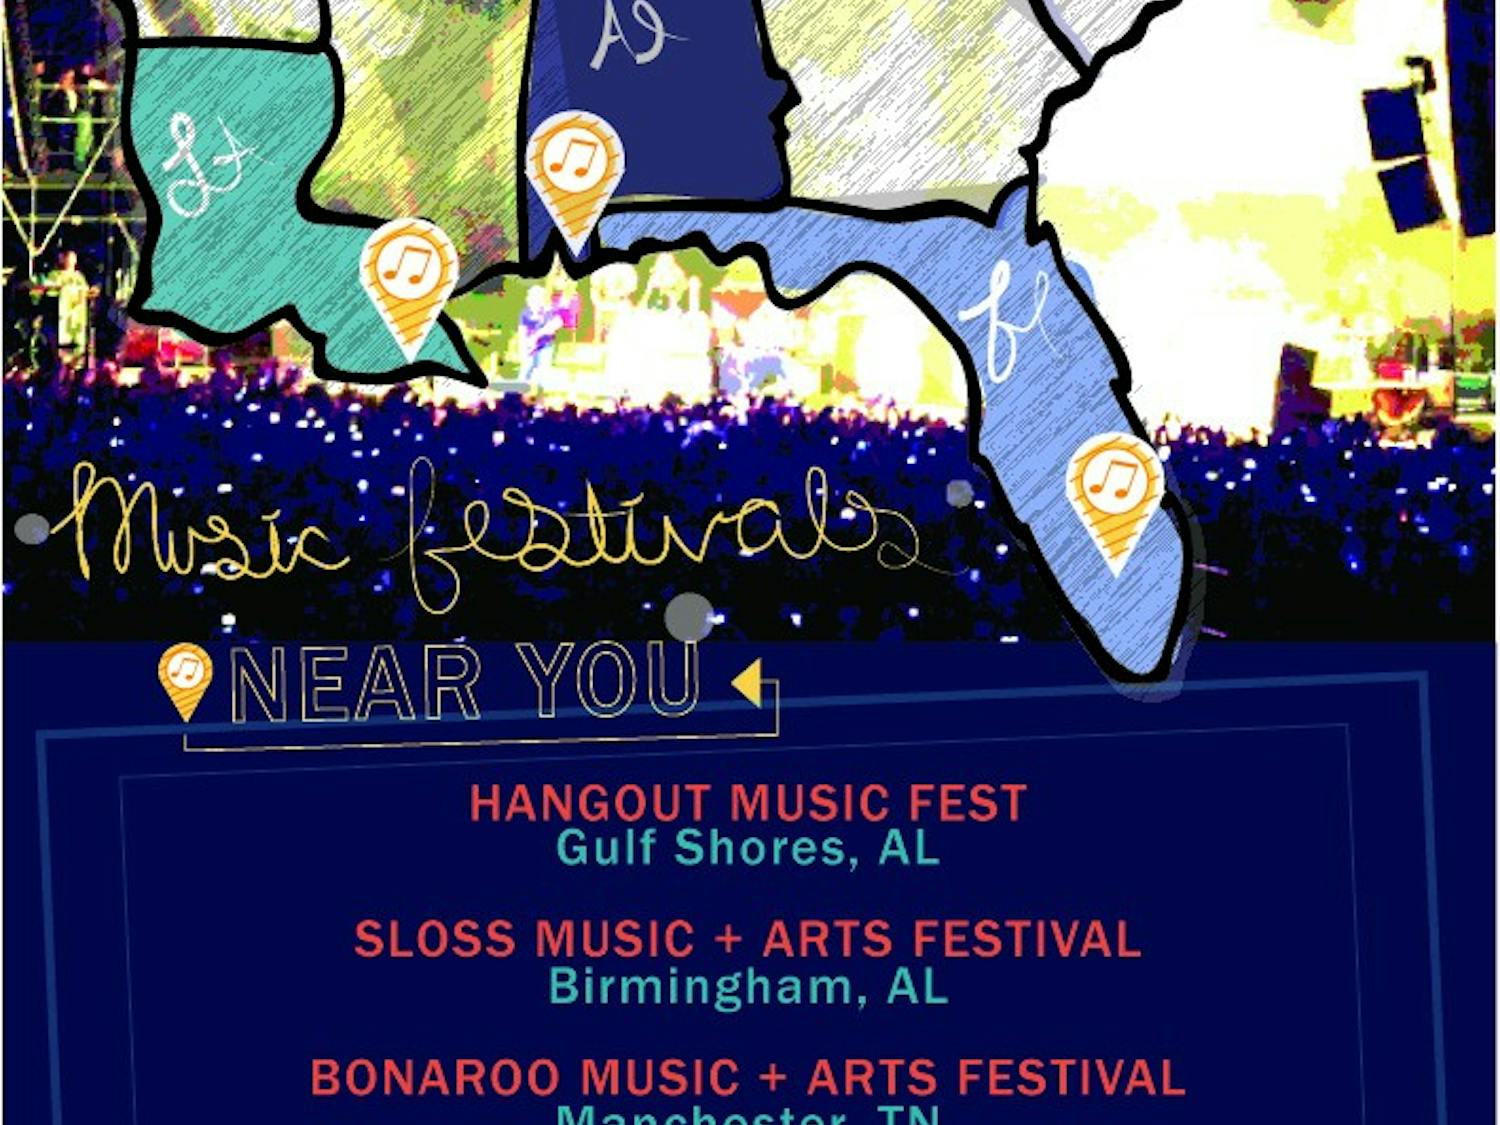 These five music festivals are located in the Southeast.